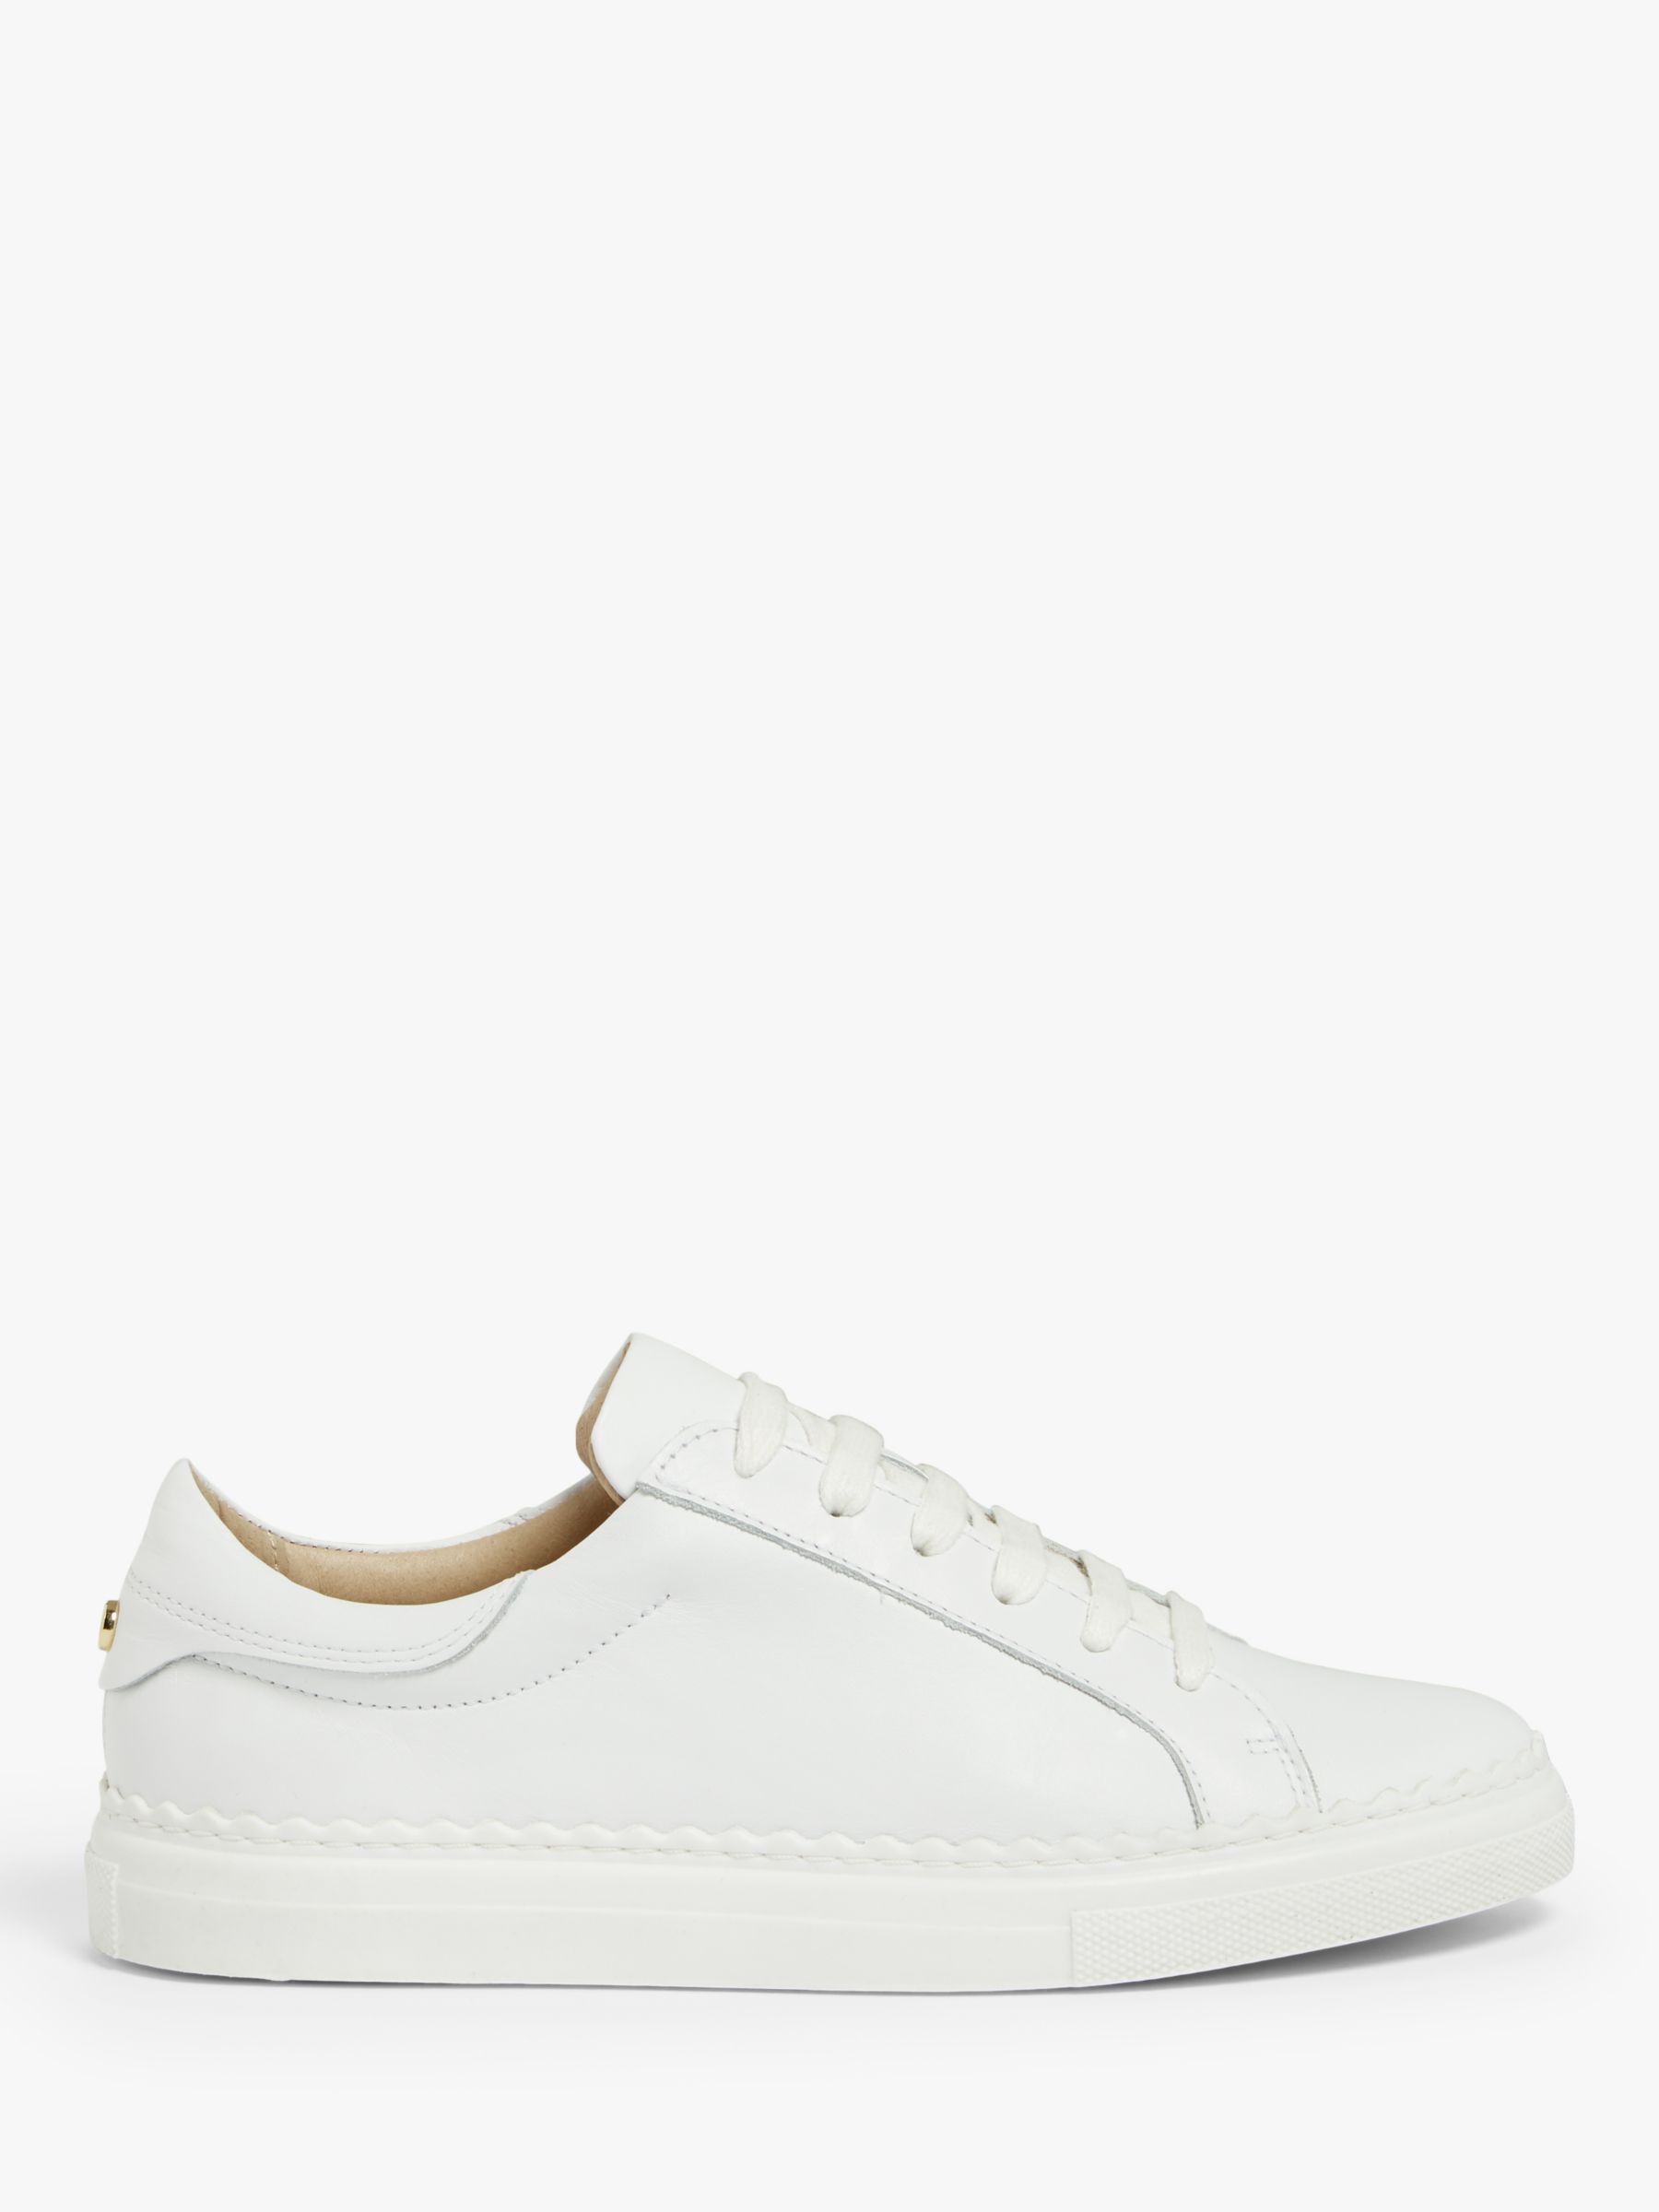 John Lewis Fiona Scalloped Detail Leather Trainers, White at John Lewis ...